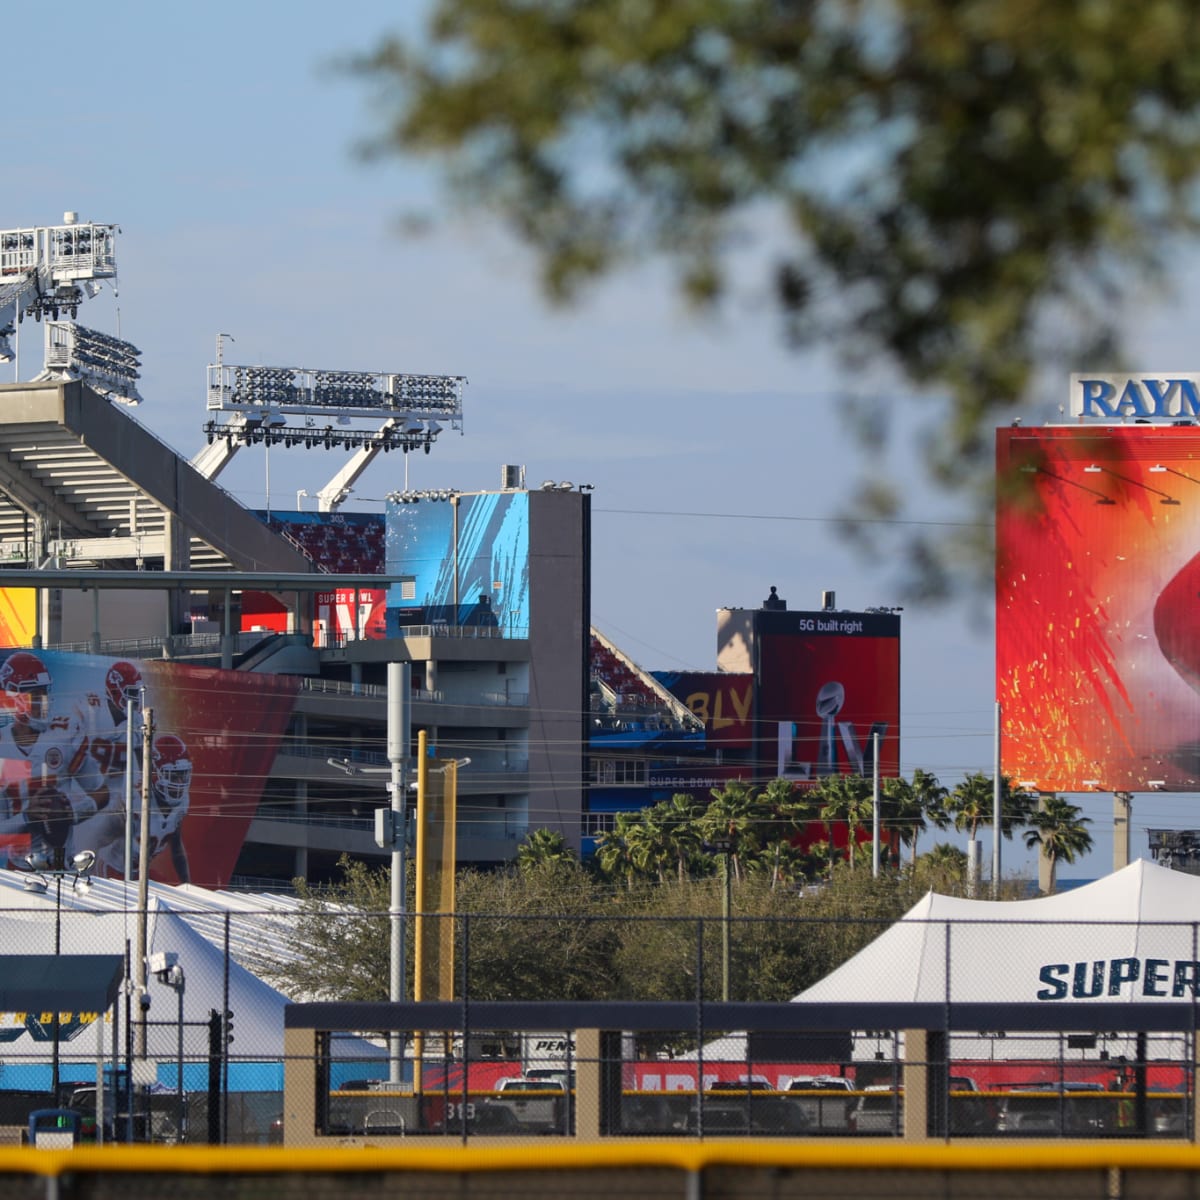 Super Bowl 55 likely to feature limited audience at Raymond James